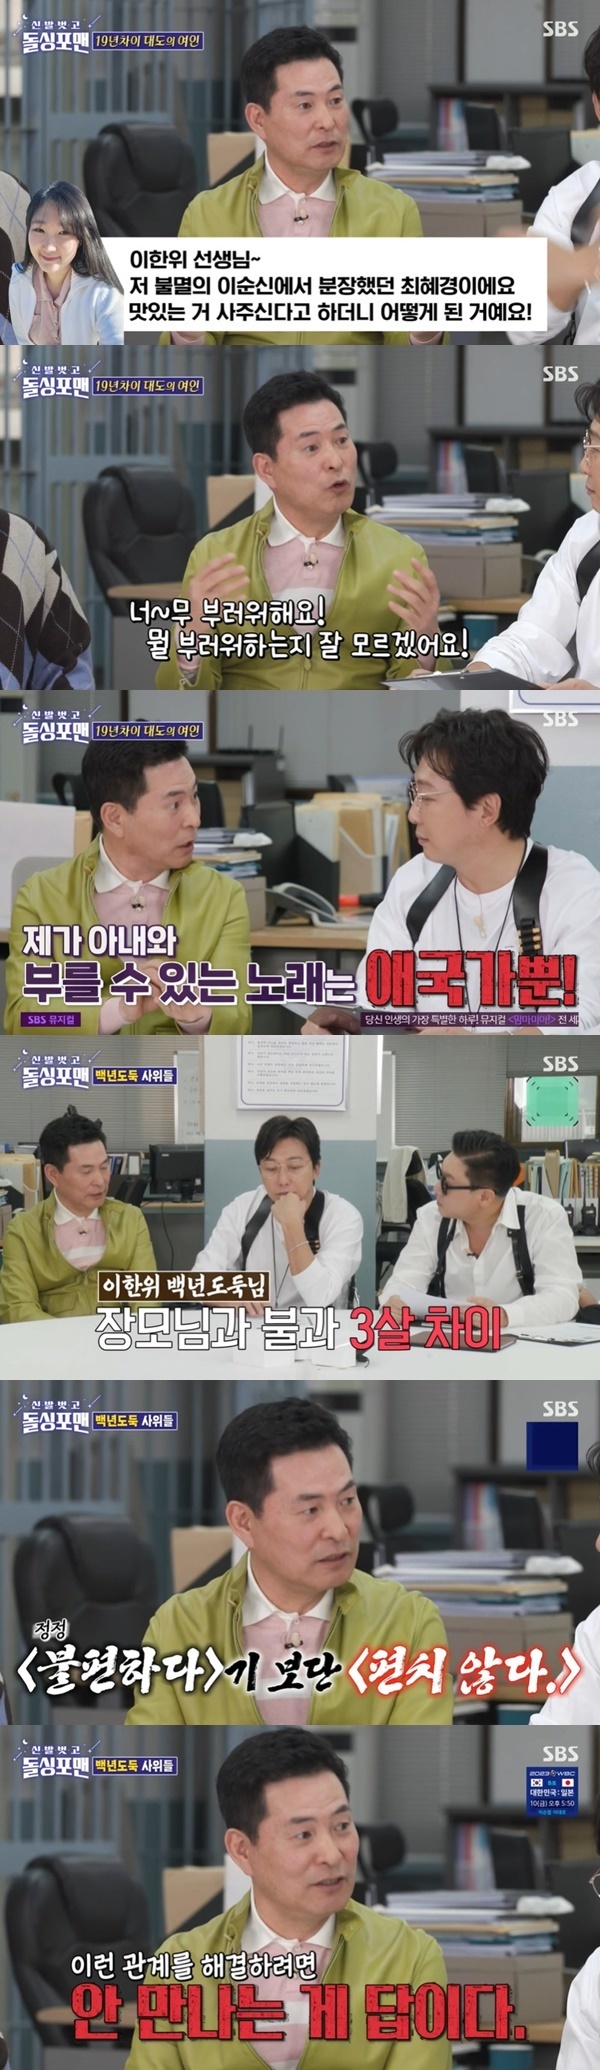 Lee Han-wi has spoken from his love story with his 19-year-old wife to his relationship with three-year-old Zhang Mo.On March 7, SBS  ⁇  Take off your shoes and dolsing foreman  ⁇ , Lee Han-wi, Lee Ji-hoon, Night vocabulary simple appeared.On this days broadcast, Lee Han-wi asked about his first meeting with his 19-year-old wife, who was the youngest member of the dramas immortal Yi Sun-sin makeup team, My wife asked me to buy some bread in a separate cafe.It was strange and fresh, so I listened to it. The historical drama was filmed all week and said that there was no time to go around, said Lim One-hee.Lee Han-wi said, You should not do that. Then, my role disappeared because of the role of disappearing in the middle. About two years later, I got a personal blog.Lee Han-wi, I am Choi Hye-kyung, who was dressed up as an immortal Yi Sun-sin. What happened to you? I remembered and contacted me a few times. I was a makeup artist and an actor. .Buy me bread, buy me rice.When Tak Jae-hoon asked, Did you think anything else when you came to the mail? Lee Han-wi said, I do not think its crazy for a 19-year-old man to have a black heart for a woman.Friends are envious of living with a woman who is 19 years younger. I do not know what envy you are. Some guesses. Its not my job. The only song I can sing with my wife is the national anthem.The things that my friends envy are for me, I explained.Lee Han-wi said that his wife seemed to like him, so he did not like it first. Lee Han-wi bought me a piece of rice, and this friend seemed to like me.When I saw him, he seemed to like me a little, but if he did not do it, he told me not to do it once or twice.The last shot Lee Han-wi fired was, Can you marry me? Lee Han-wi said, Why not? Lee Han-wi said, I was bewildered.I think I can handle this. I think about it for about 10 seconds. So lets try it. I continued to solve Min One. Others say marriage, but I completed Min One.Lee Han-wi said that he was three years older than Zhang Mo, and he was worried about the 19-year-old difference, but he did not care about other environments.When I decided to do this marriage, I was very excited around me, and my wife looked back at me because I had a serious concern except for my wife.Lee Sang-min is in his 16th year of marriage, and he still feels uncomfortable with Zhang Mo. Lee Han-wi said, Its more uncomfortable than uncomfortable.When Kim Jun-ho asked if the karaoke selection would be similar, Lee Han-wi said, Im not going to go and cut it off. Lee Sang-min asked me if Zhang Mo called Lee Seobang. Lee Han-wi never called it.I asked him if he had eaten his fathers rice.